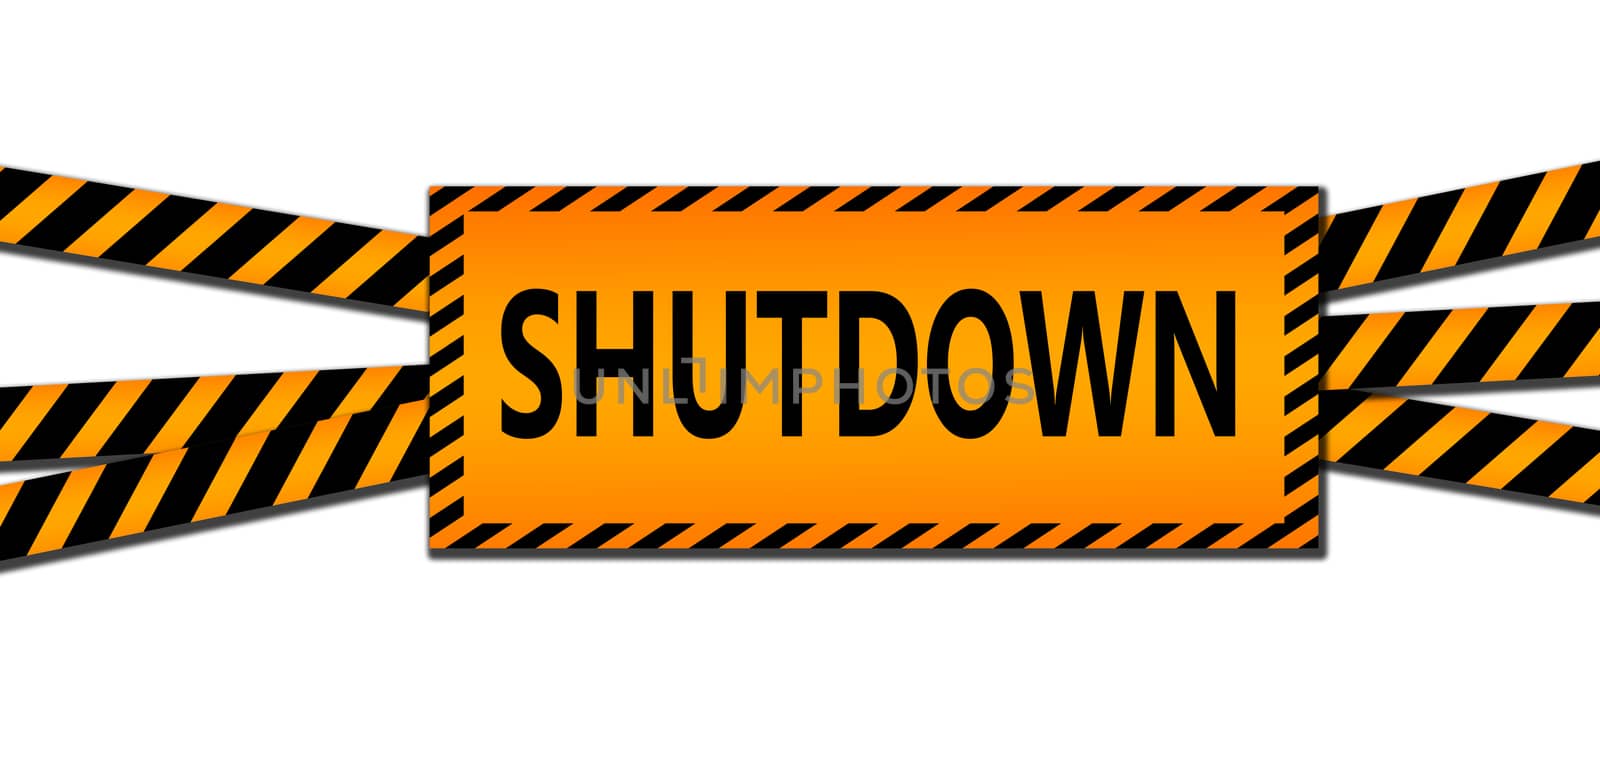 Shutdown sign between black and yellow striped ribbons isolated by tang90246